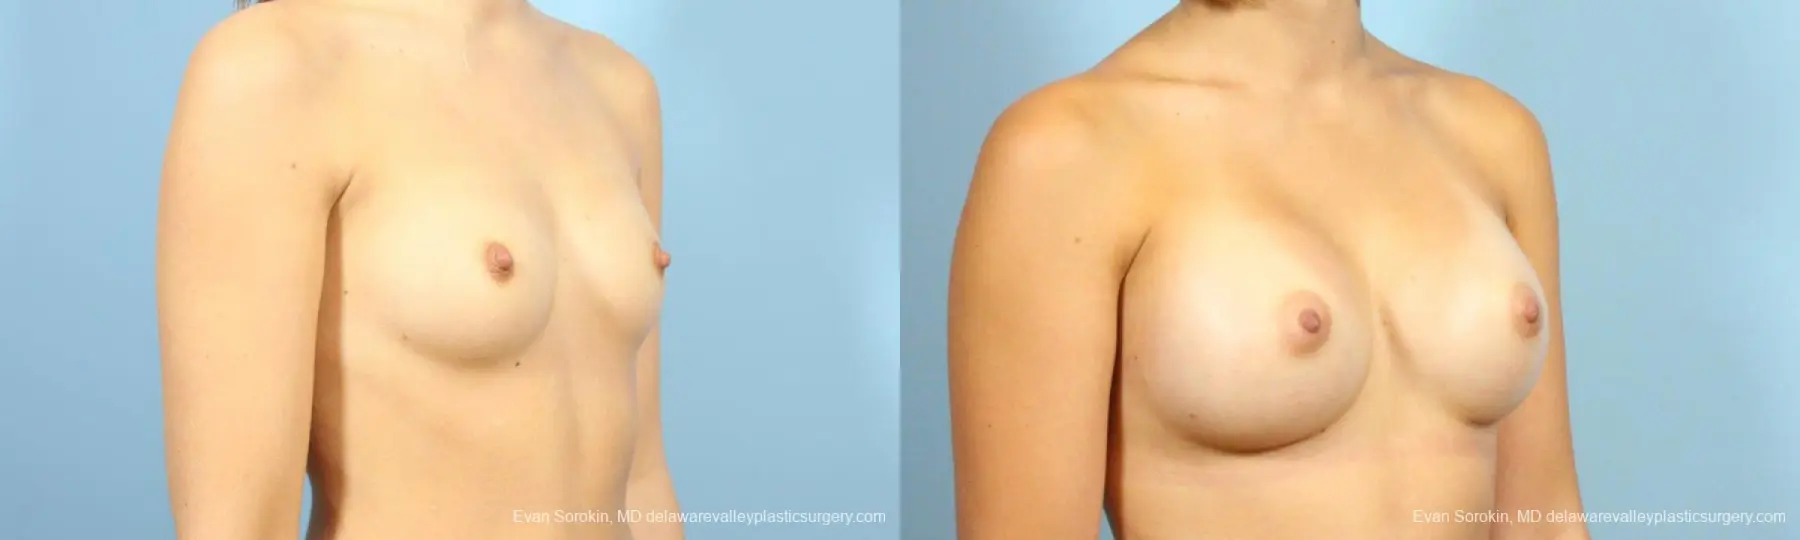 Philadelphia Breast Augmentation 8641 - Before and After 2